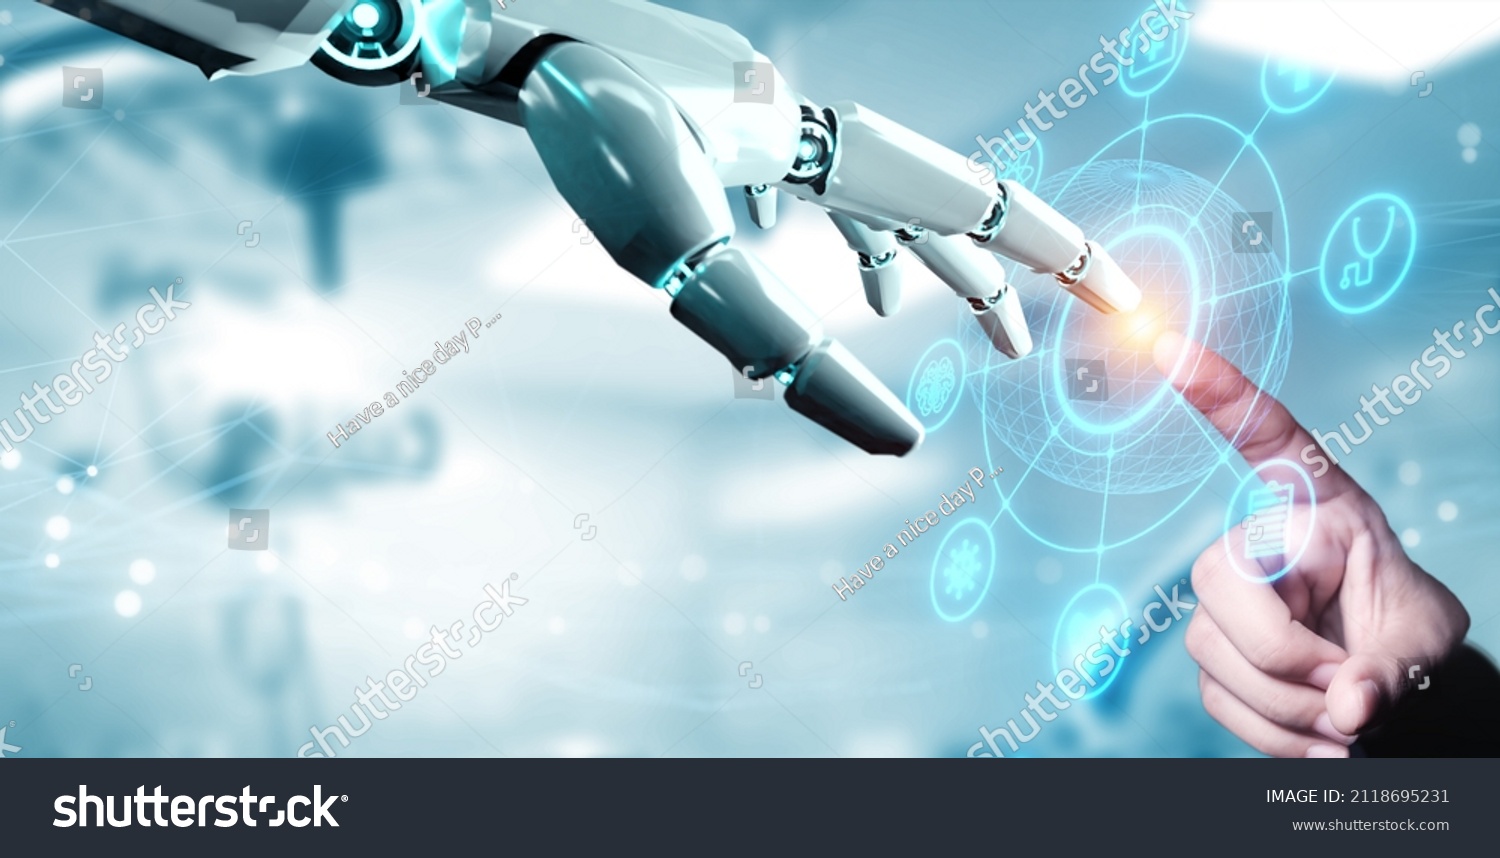 Robot hand ai artificial intelligence assistance for medical healthcare practices operation surgical performance, unity with human and ai concept, with graphical icon display blue banner background #2118695231